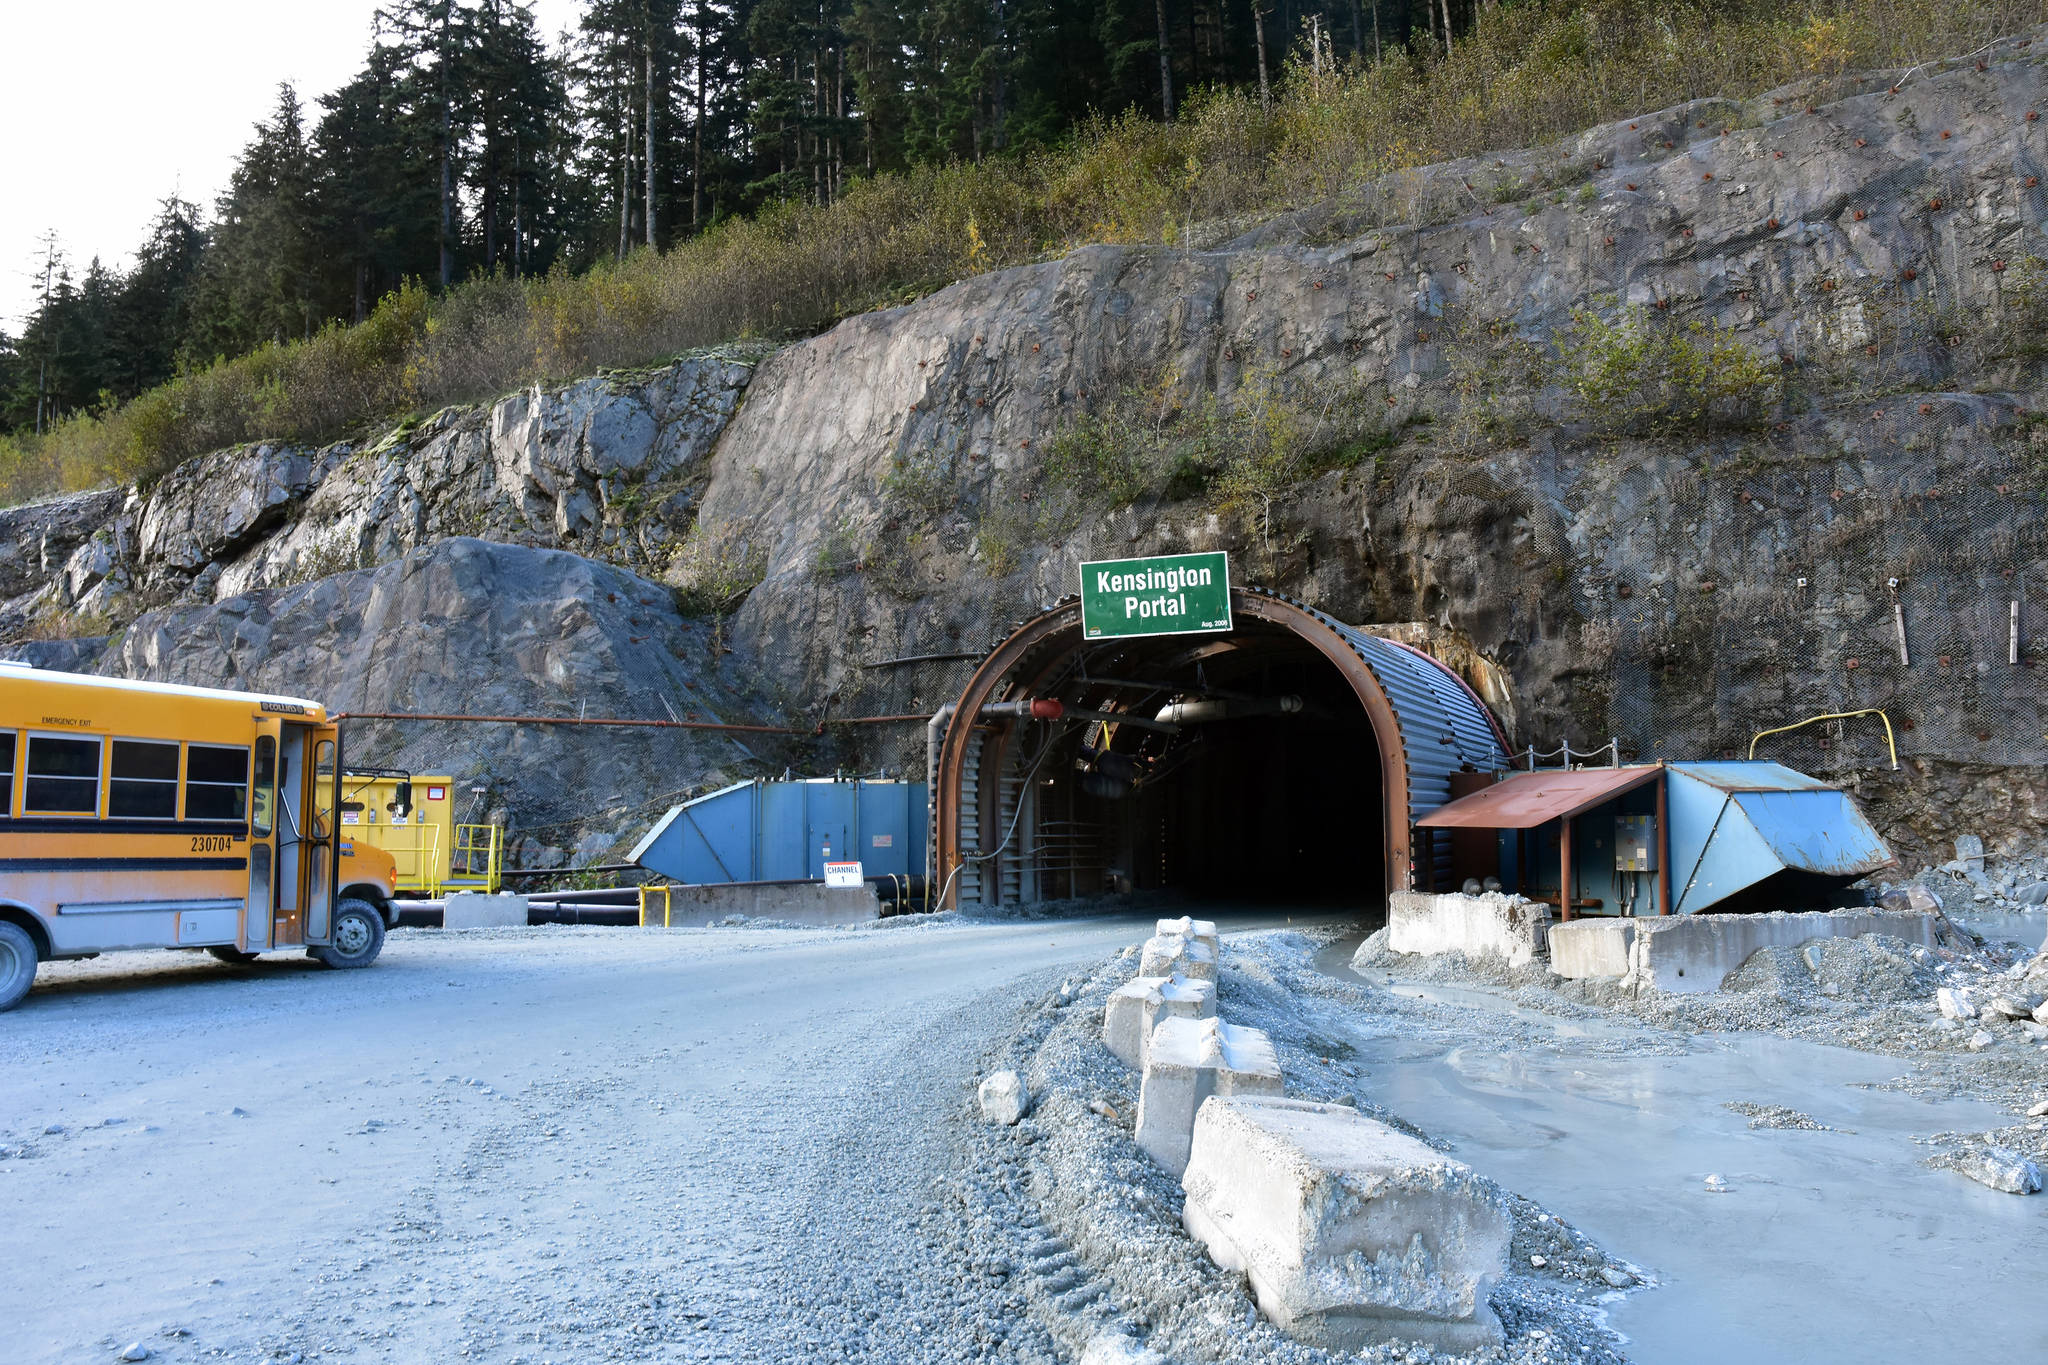 One of three entrances or “portals,” to the Kensington Gold Mine on Monday, Oct. 14, 2019. (Peter Segall | Juneau Empire)